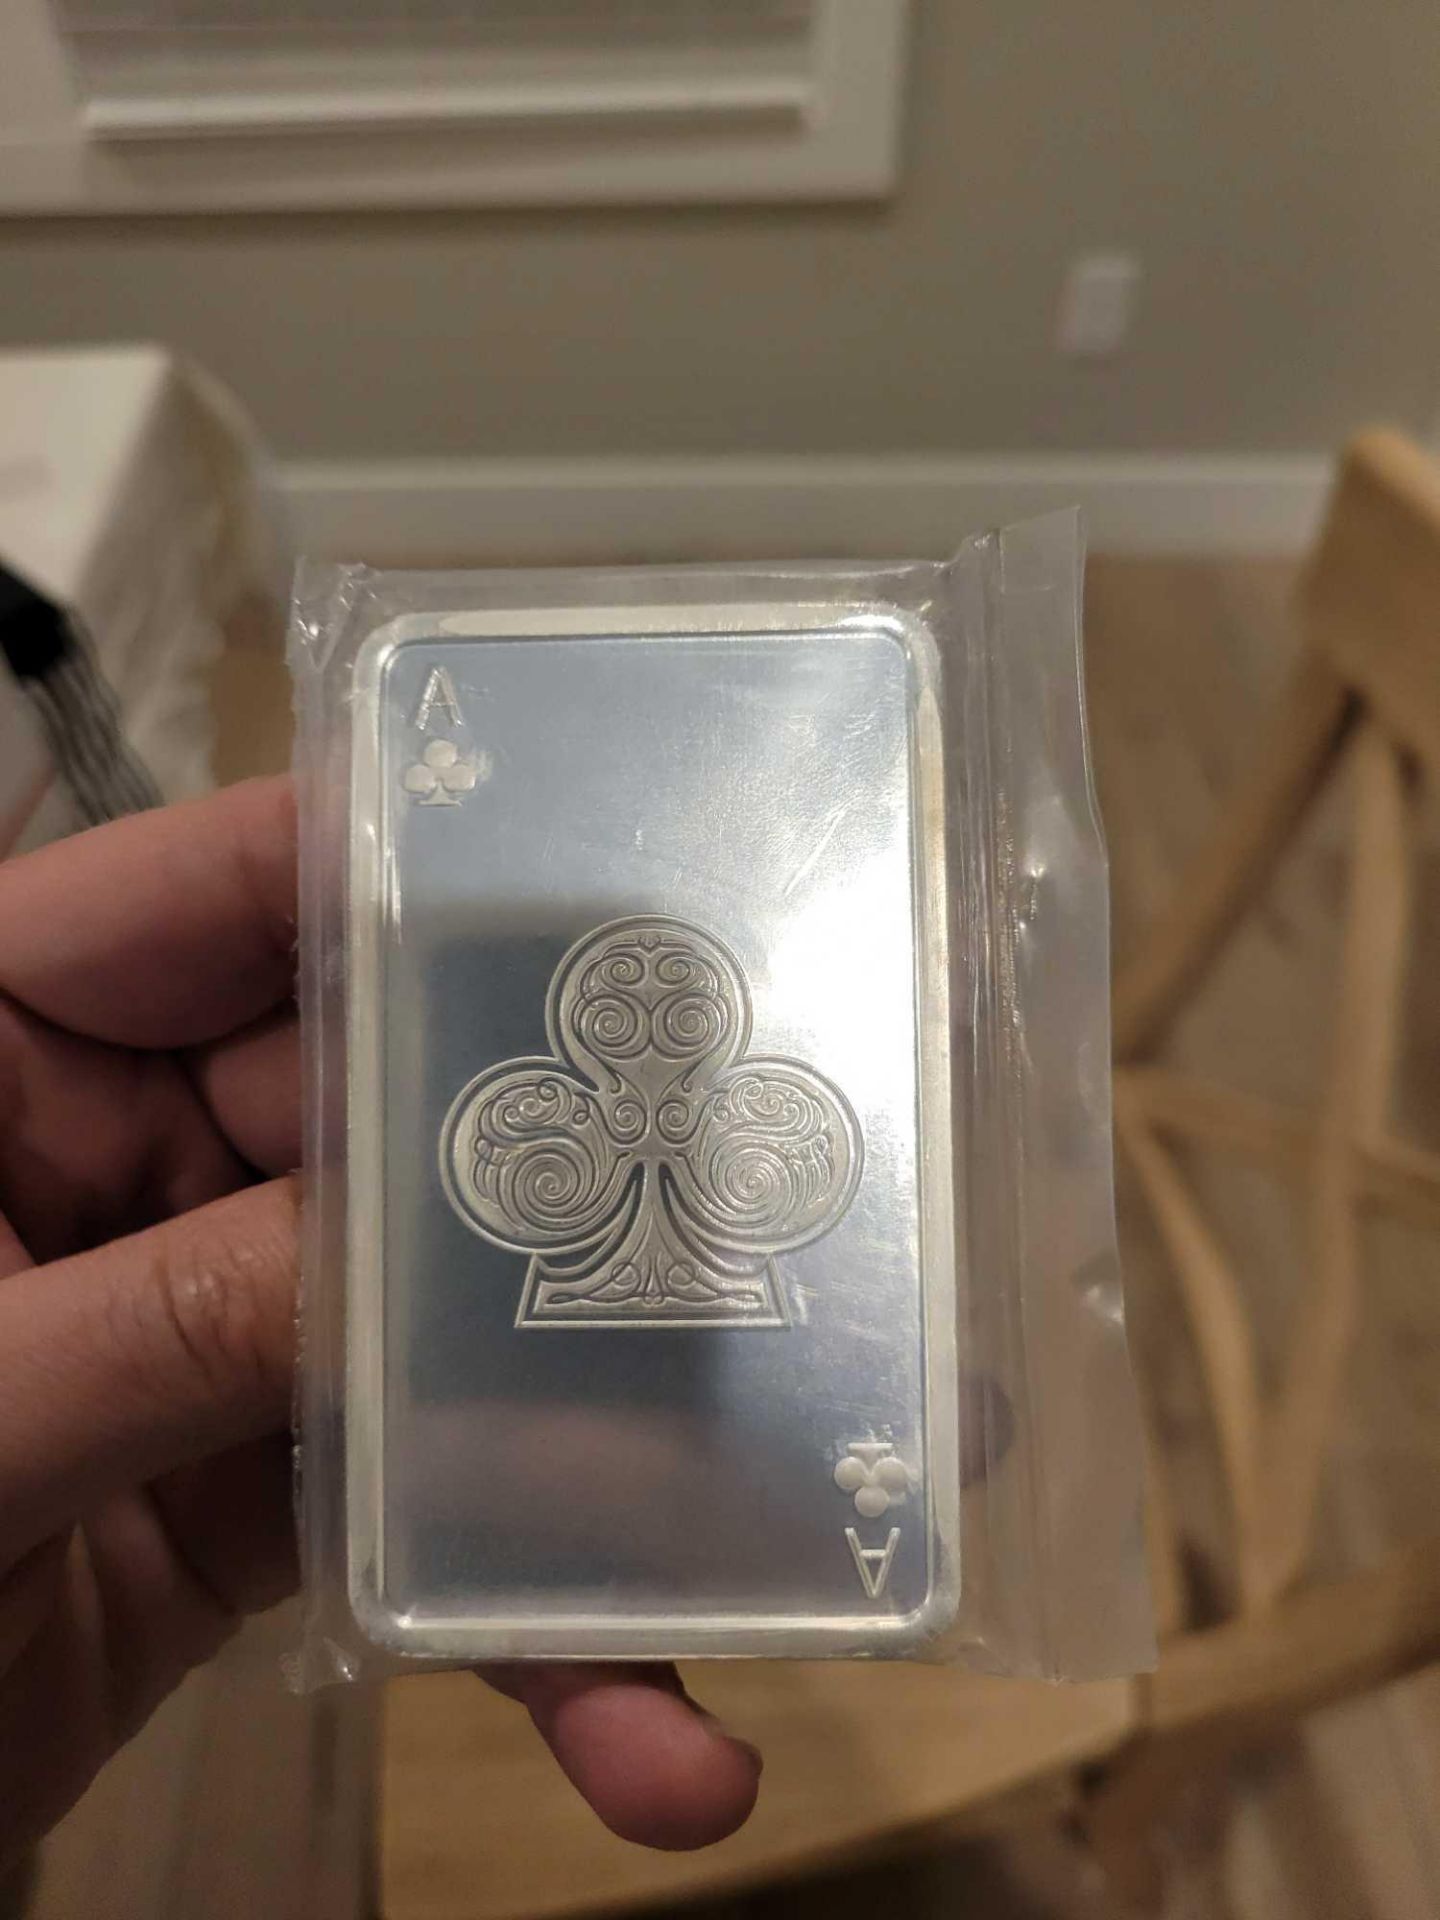 10 oz Ace of Clubs Silver Bar - Image 3 of 4